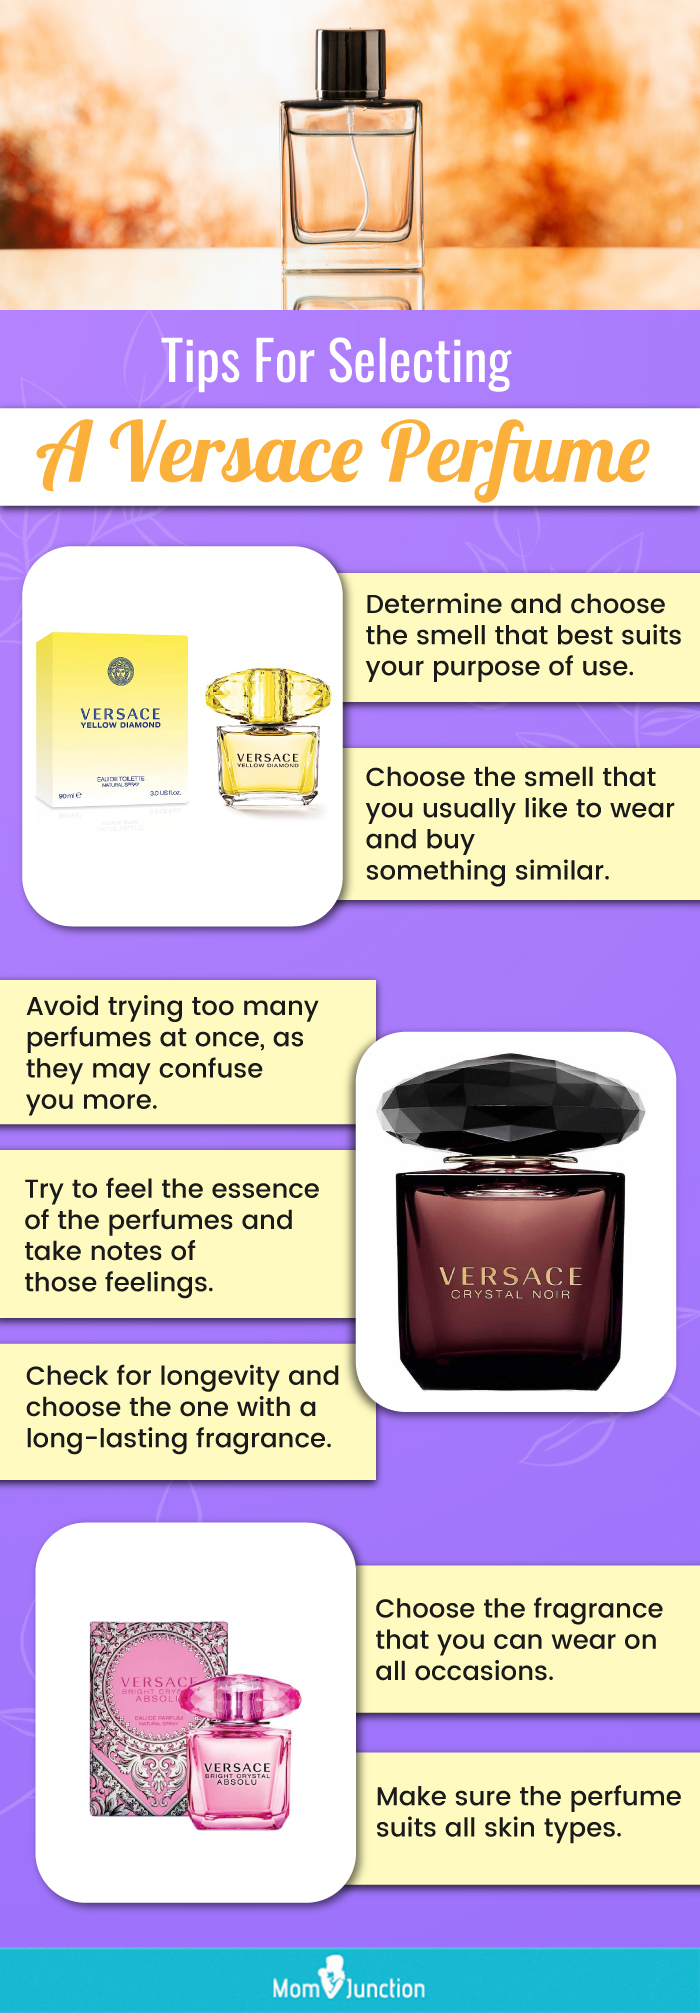 Tips For Selecting A Versace Perfume (infographic)